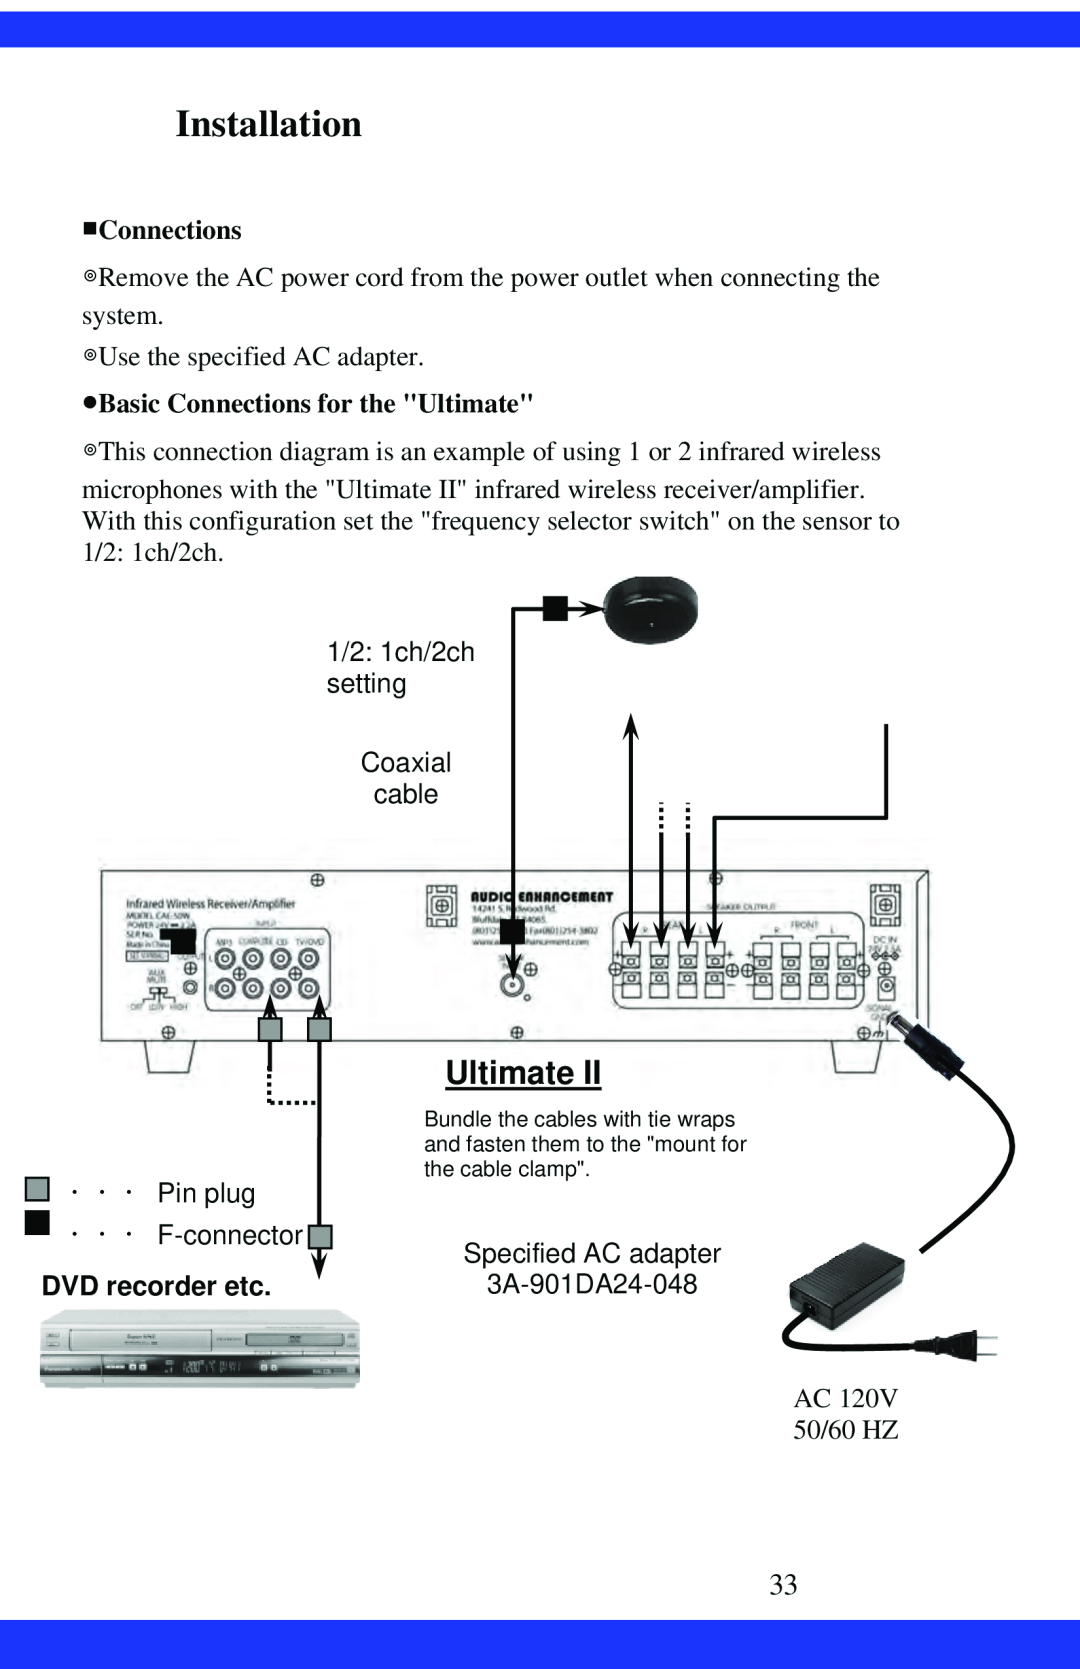 Dukane CAE-20W instruction manual Installation, Basic Connections for the Ultimate, DVD recorder etc 